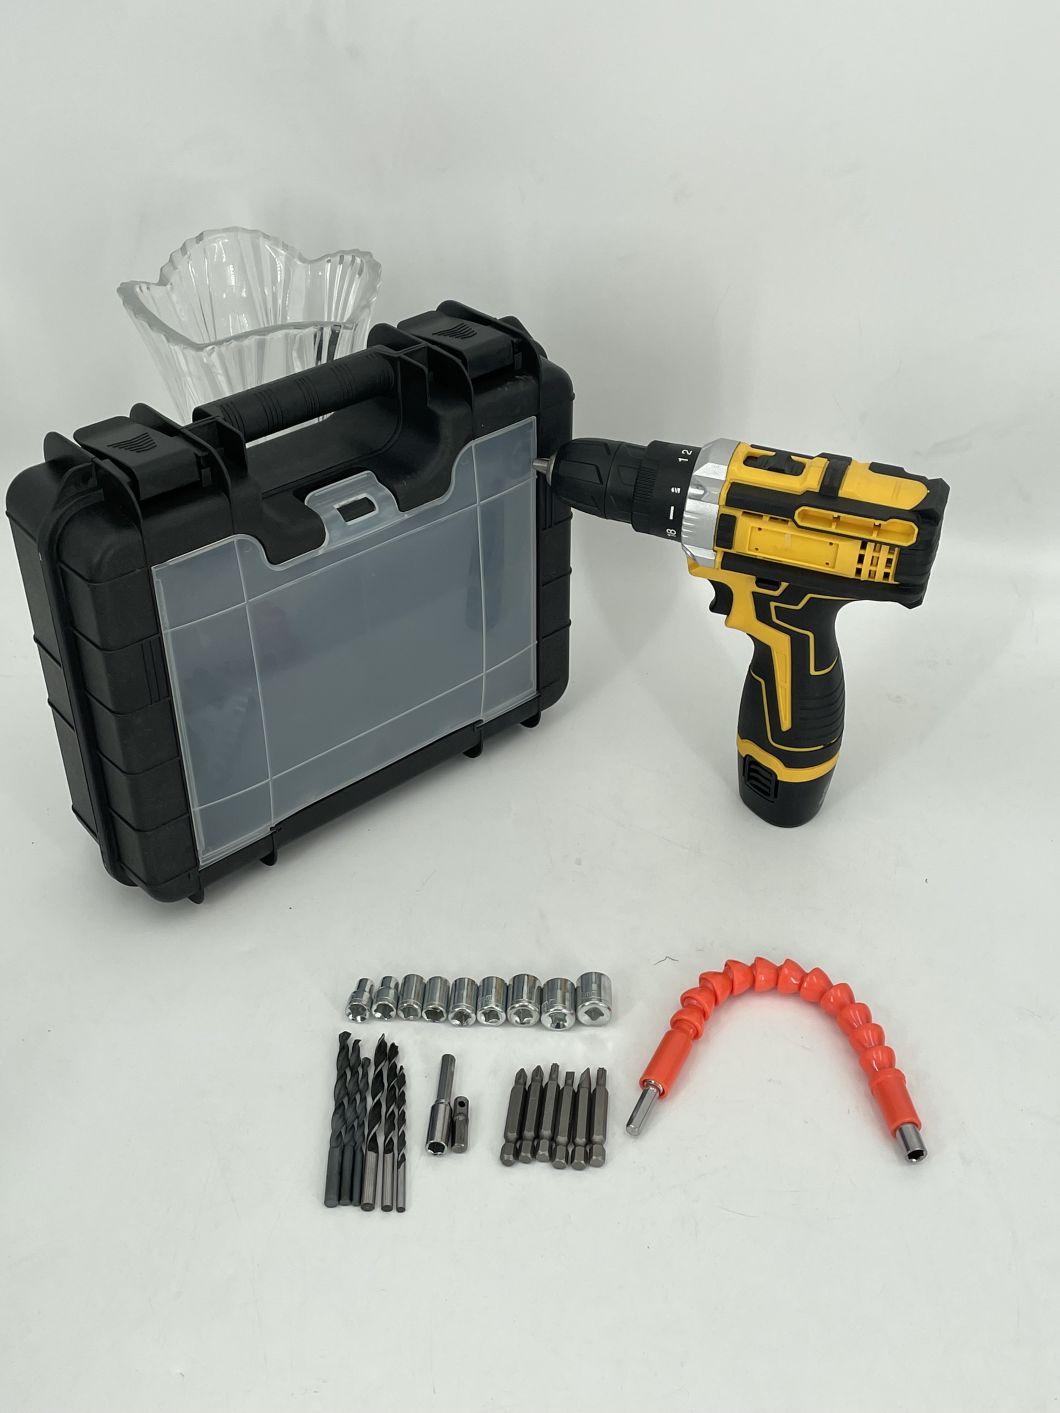 Cordless Drill with Lithium Battery and Wire Charger Impact Drill